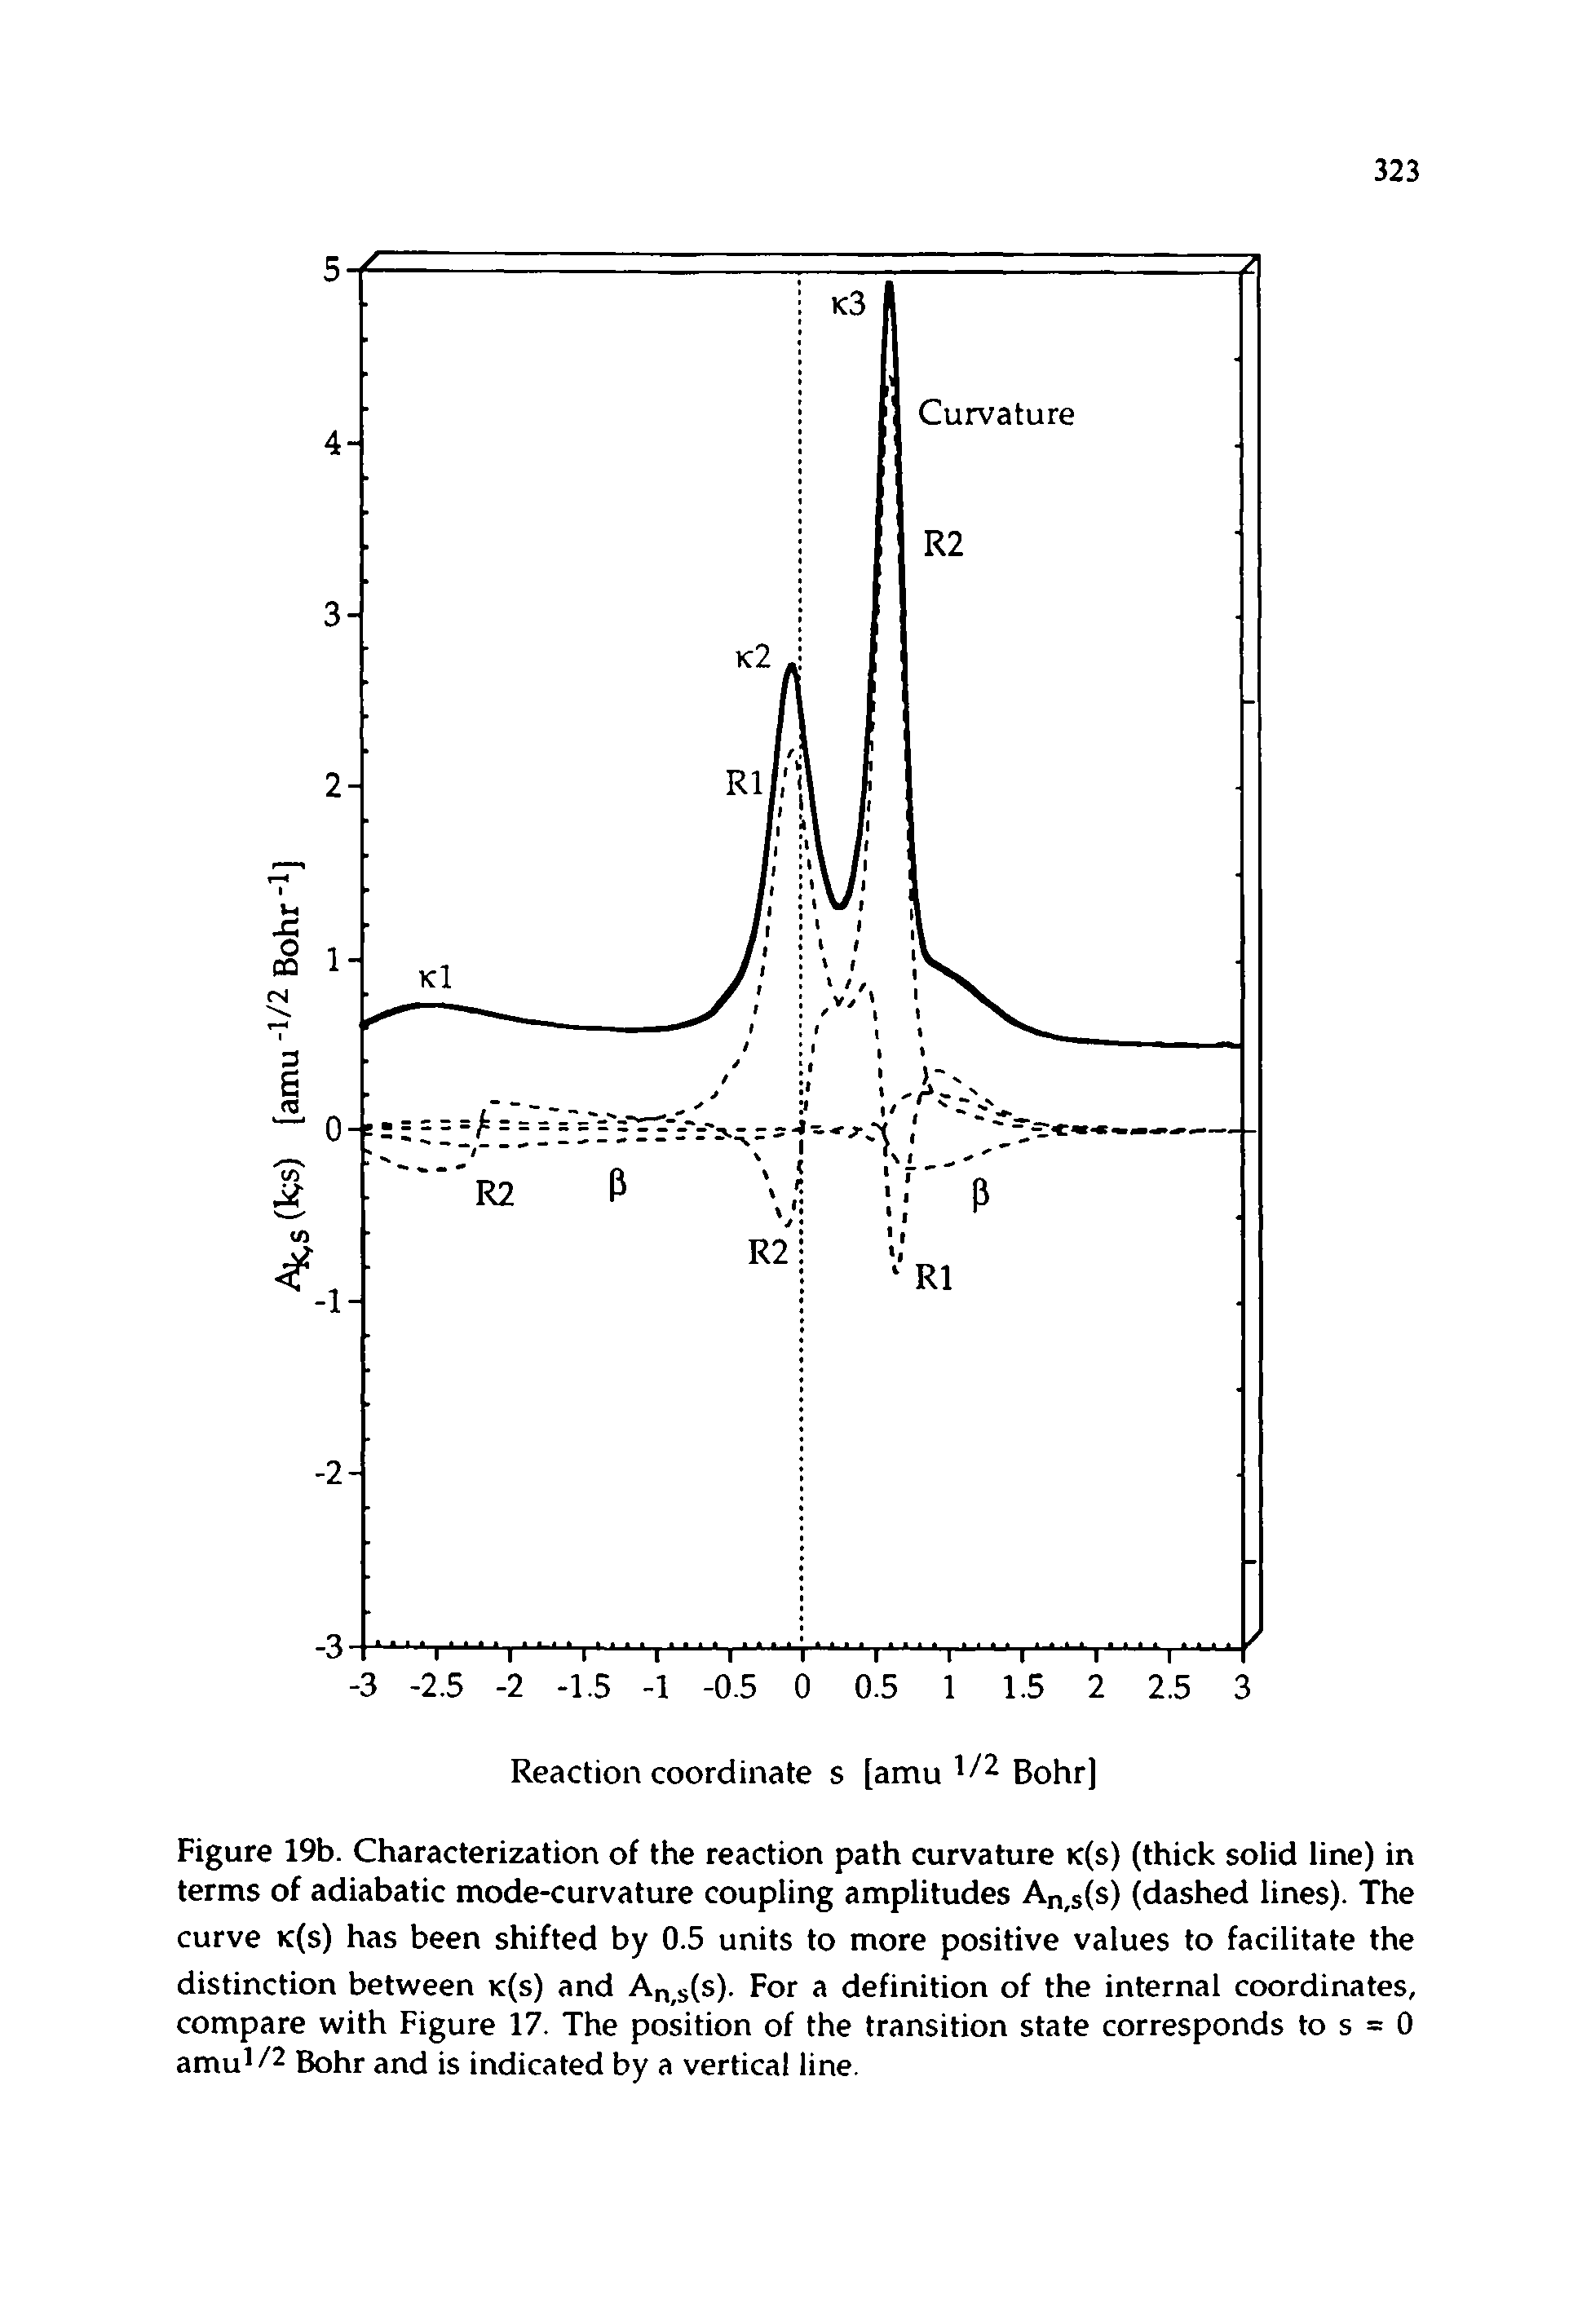 Figure 19b. Characterization of the reaction path curvature k(s) (thick solid line) in terms of adiabatic mode-curvature coupling amplitudes An,s(s) (dashed lines). The curve k(s) has been shifted by 0.5 units to more positive values to facilitate the distinction between k(s) and An s(s). For a definition of the internal coordinates, compare with Figure 17. The position of the transition state corresponds to s = 0 amul/2 Bohr and is indicated by a vertical line.